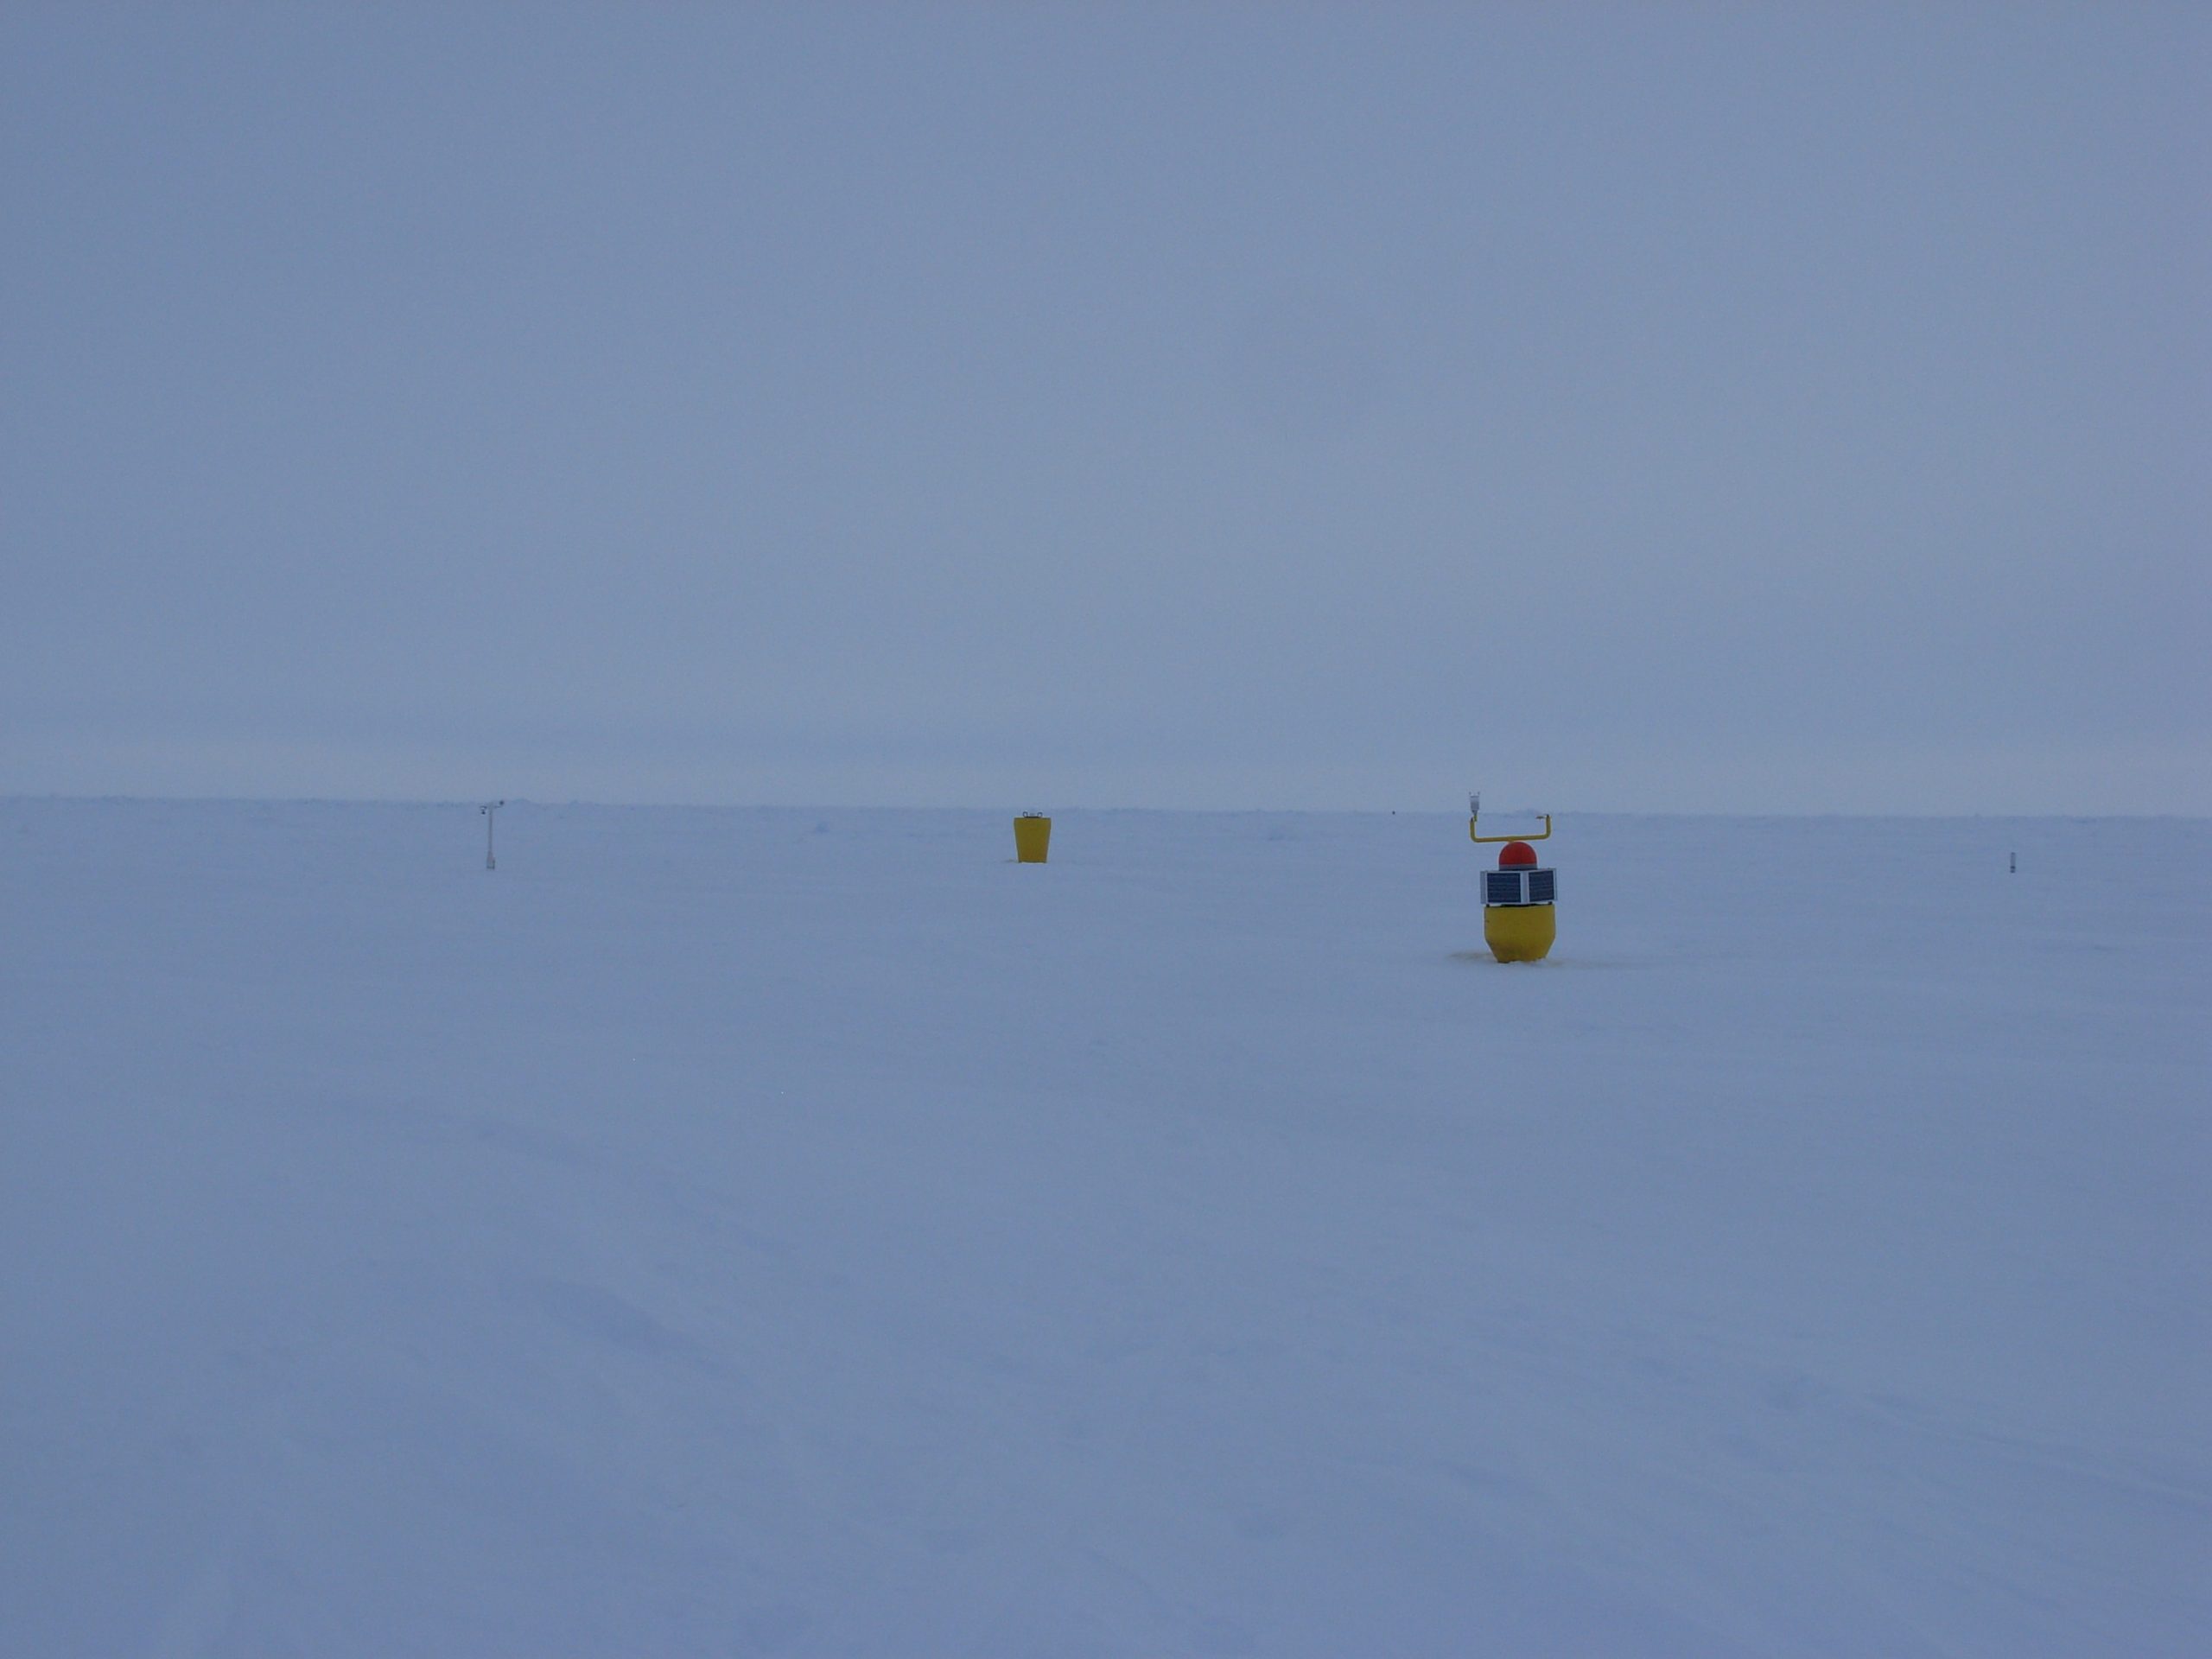 Ice-Based Observatory deployed at ice camp Barneo including (from left to right) S-IMB, ITP 95, AOFB and Ice-T. (Photo by Rick Krishfield)